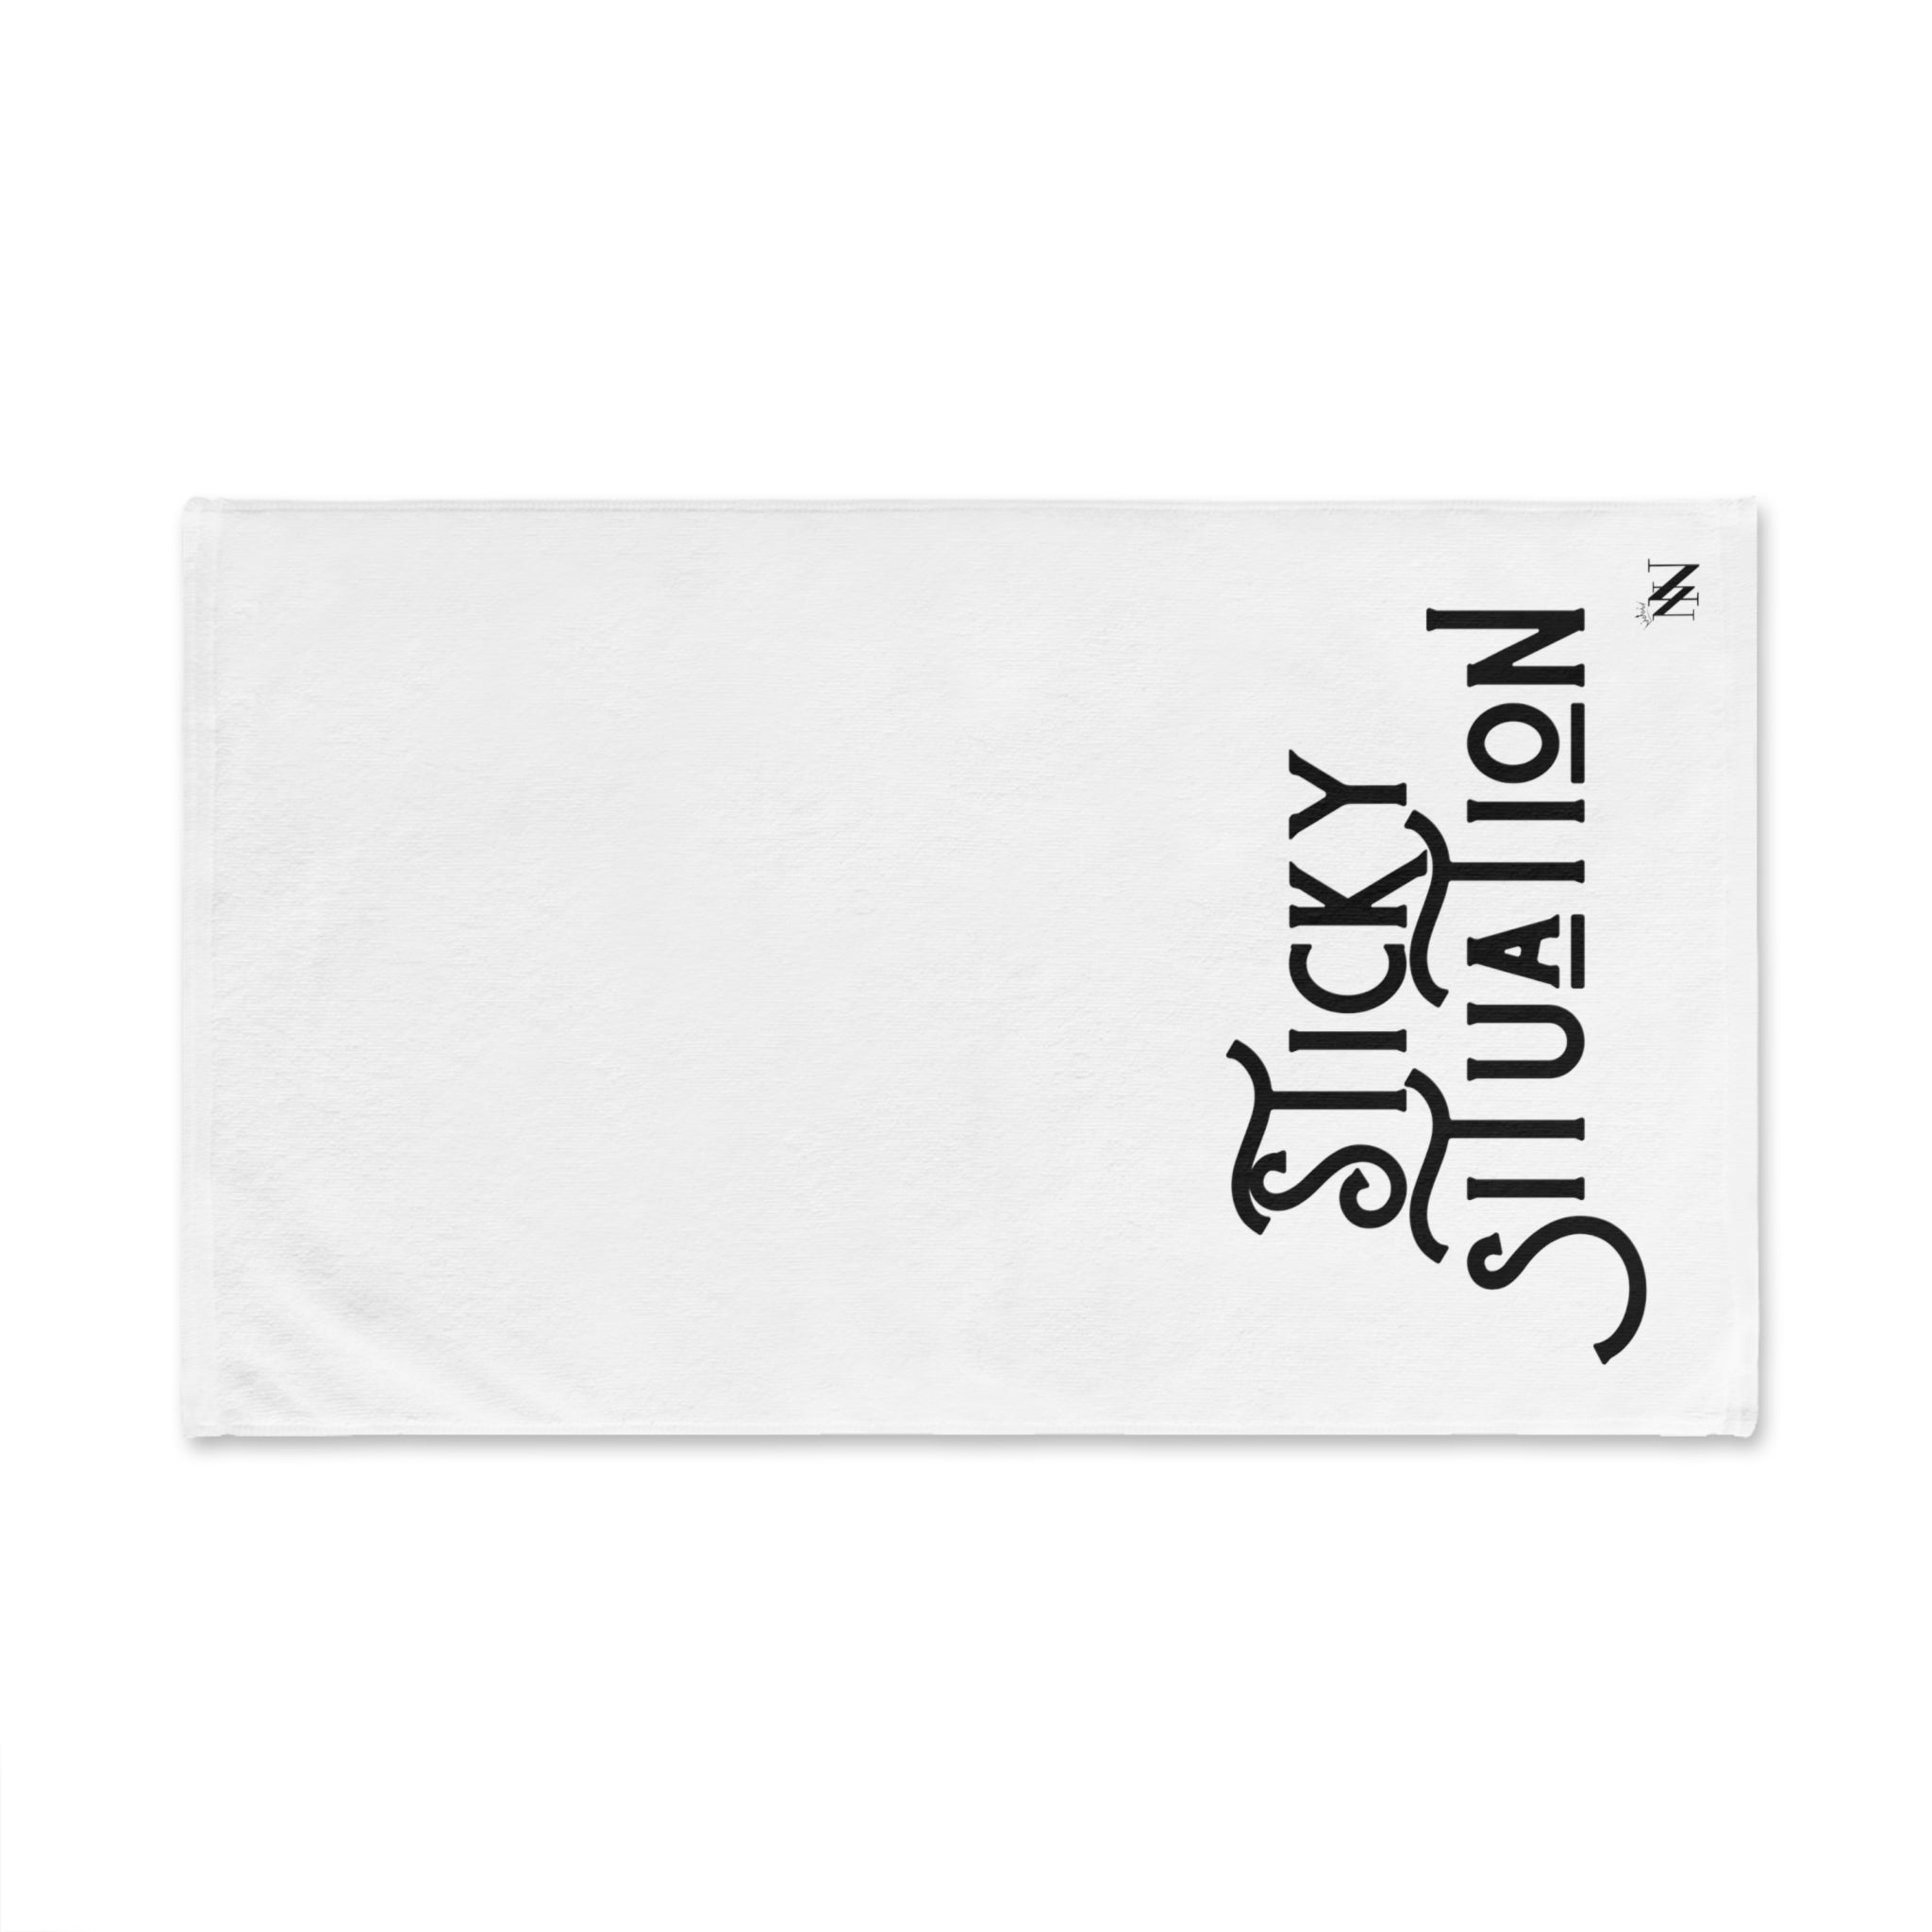 Sticky Situation White | Funny Gifts for Men - Gifts for Him - Birthday Gifts for Men, Him, Her, Husband, Boyfriend, Girlfriend, New Couple Gifts, Fathers & Valentines Day Gifts, Christmas Gifts NECTAR NAPKINS